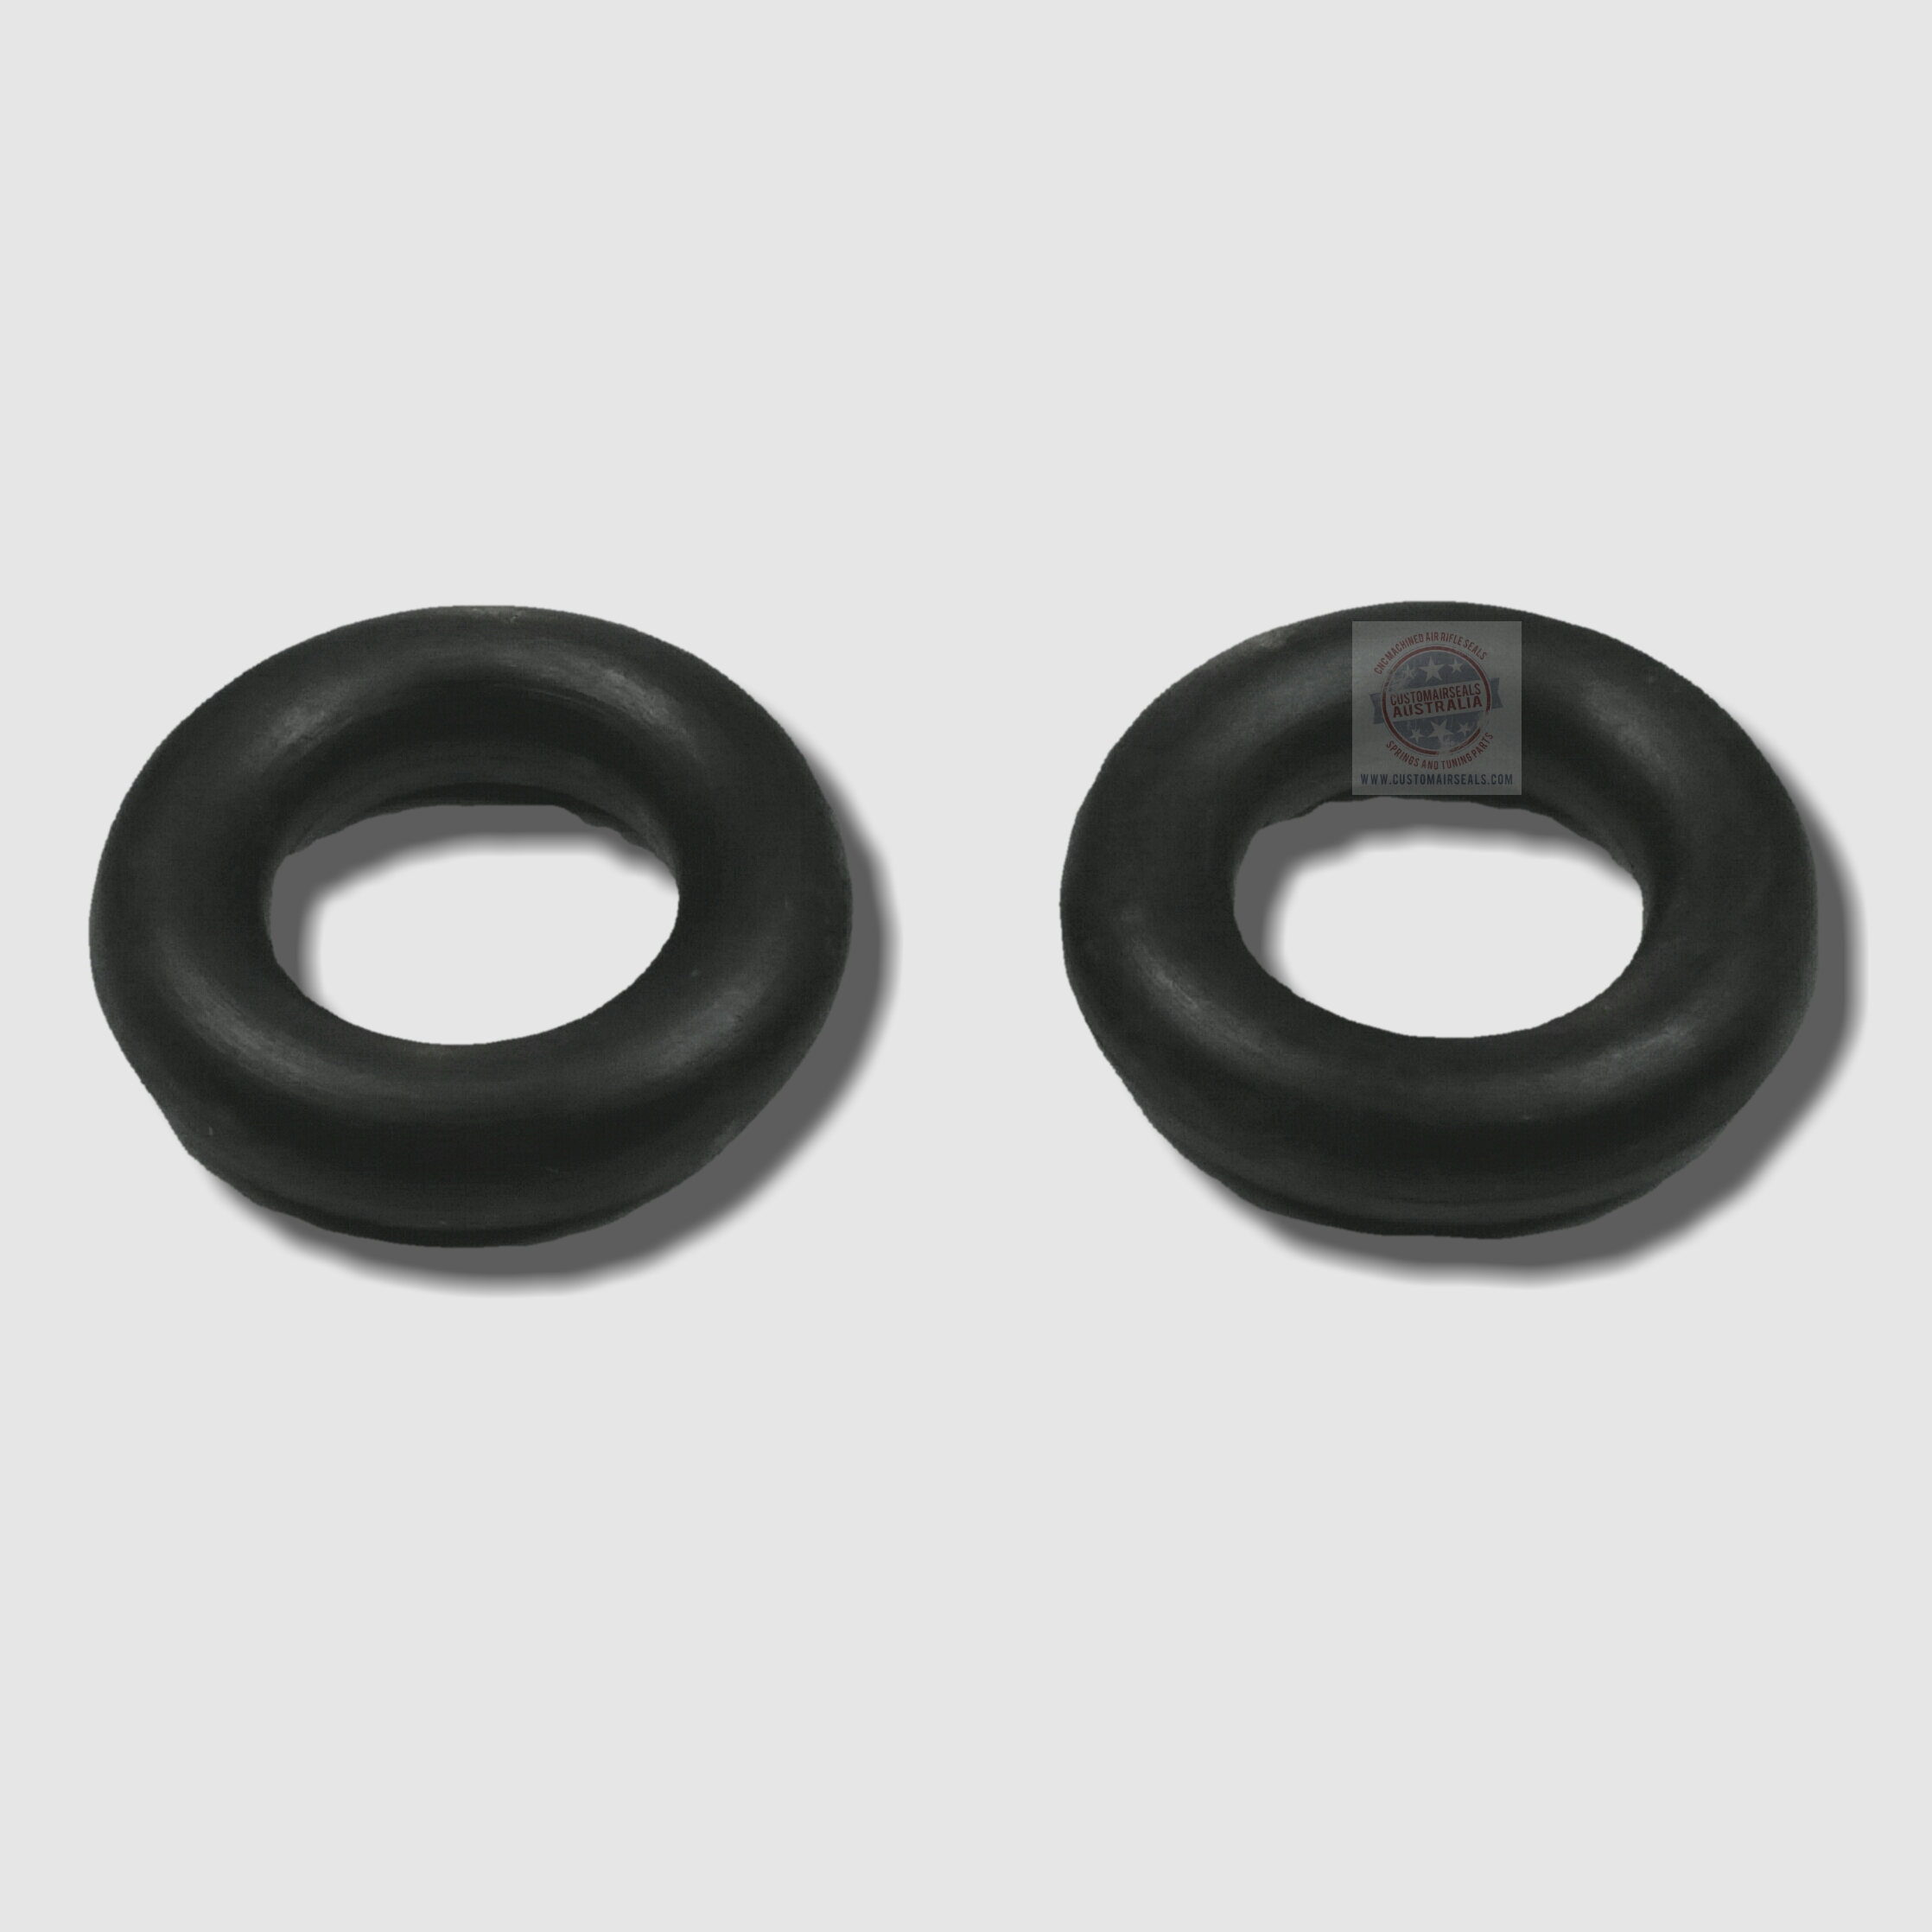 Genuine Air Arms TX200 and Pro Sport Air Rifle Piston Washers Seal Set 